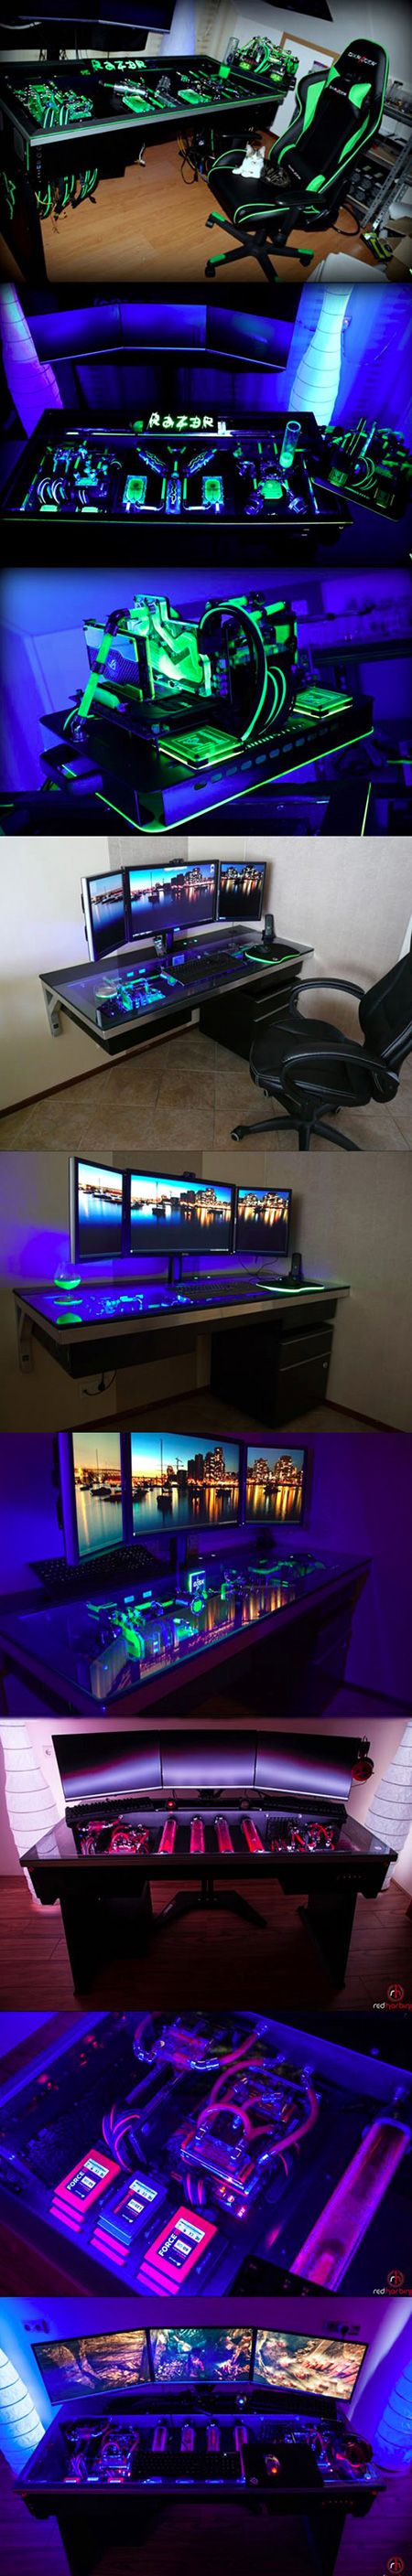 You can either buy a desktop computer, or have one built directly into a desk.